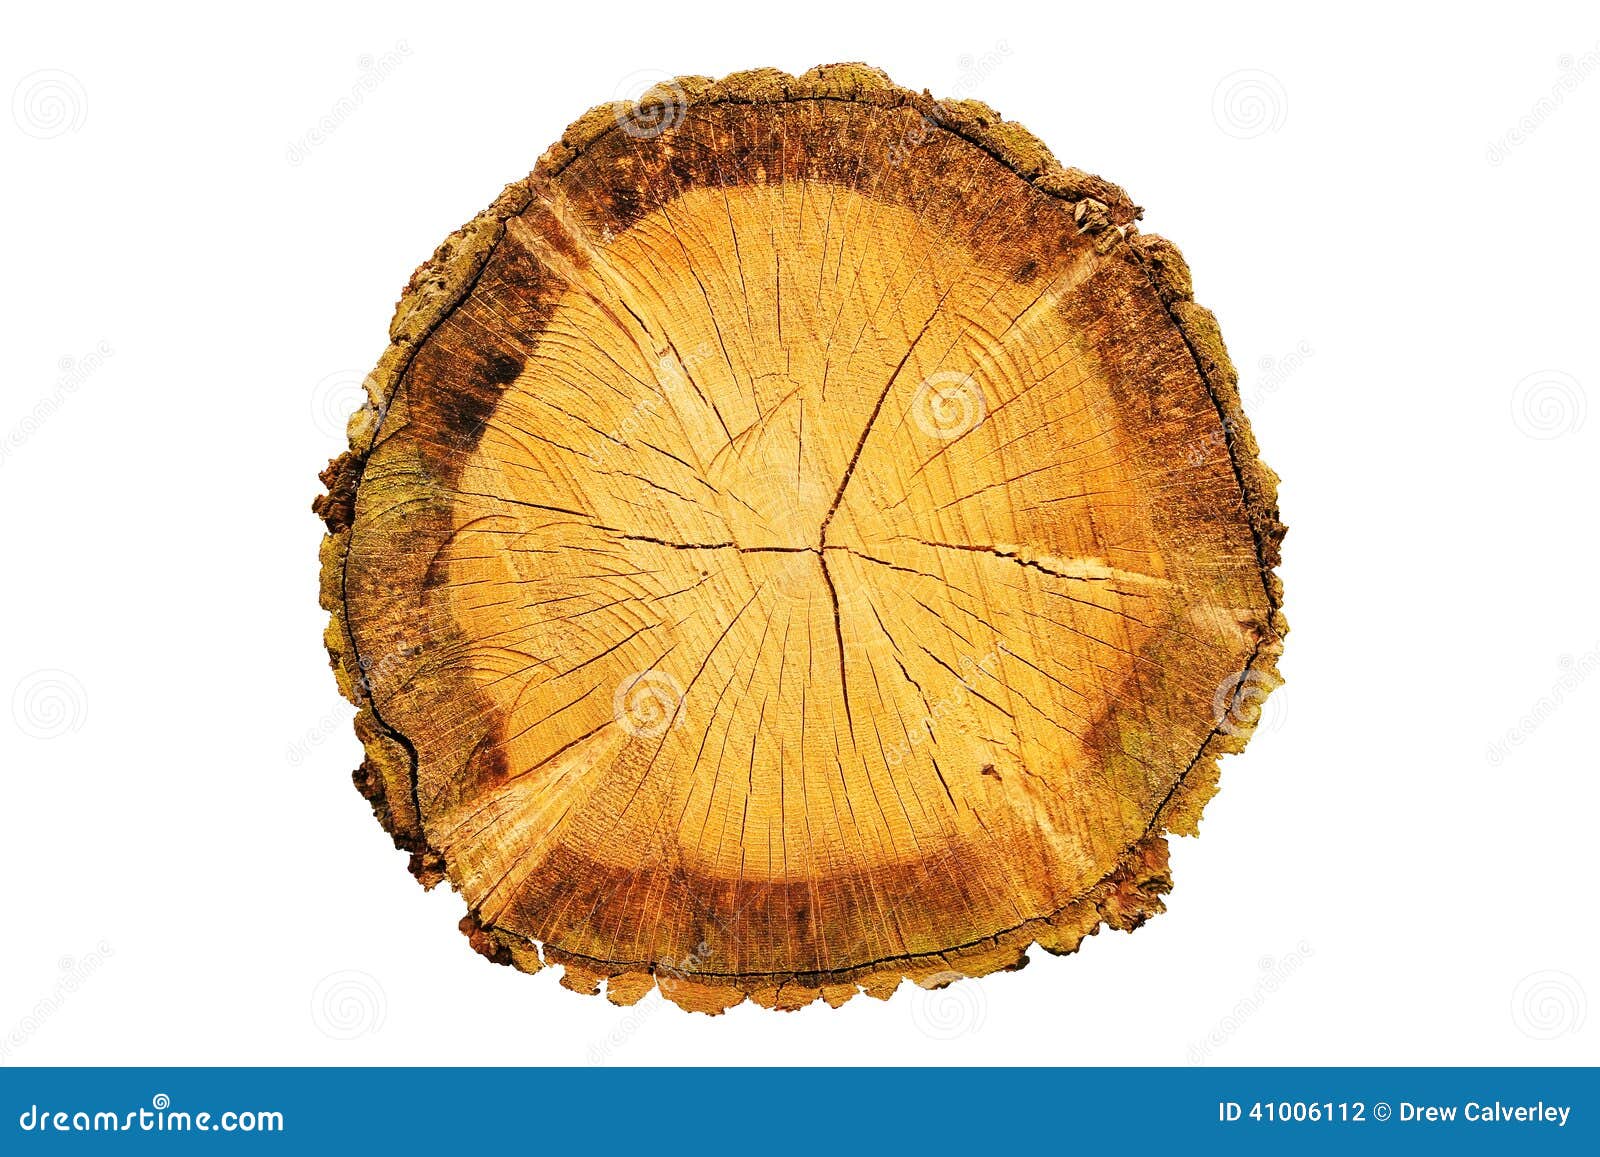 Wooden Circle With A Split Cut Of The Log Stock Photo, Picture and Royalty  Free Image. Image 11874051.